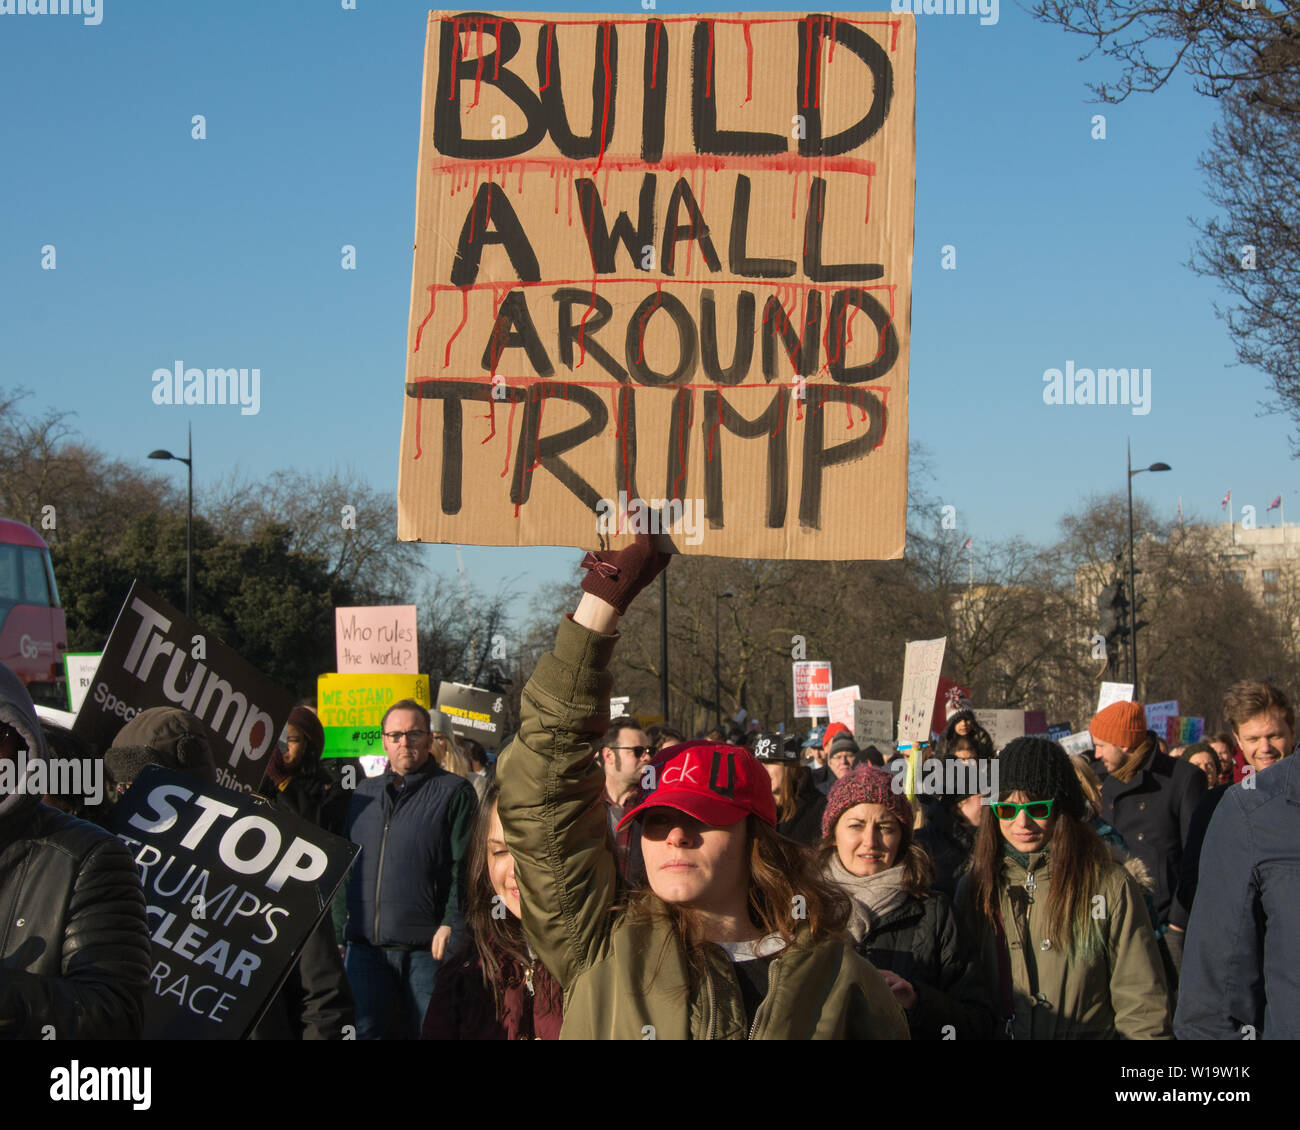 Women's March, London, UK, 21st January 2017. A woman holds a placard reading 'Build a wall around Trump' referencing his policies on immigration, the day after the inauguration of President Donald Trump. Up to 10,000 attended a protest march in London as women worldwide marked the day by demonstrating in an act of international solidarity. Many carried placards referencing statements made by Donald Trump, considered by many as anti-women or otherwise offensive. Stock Photo